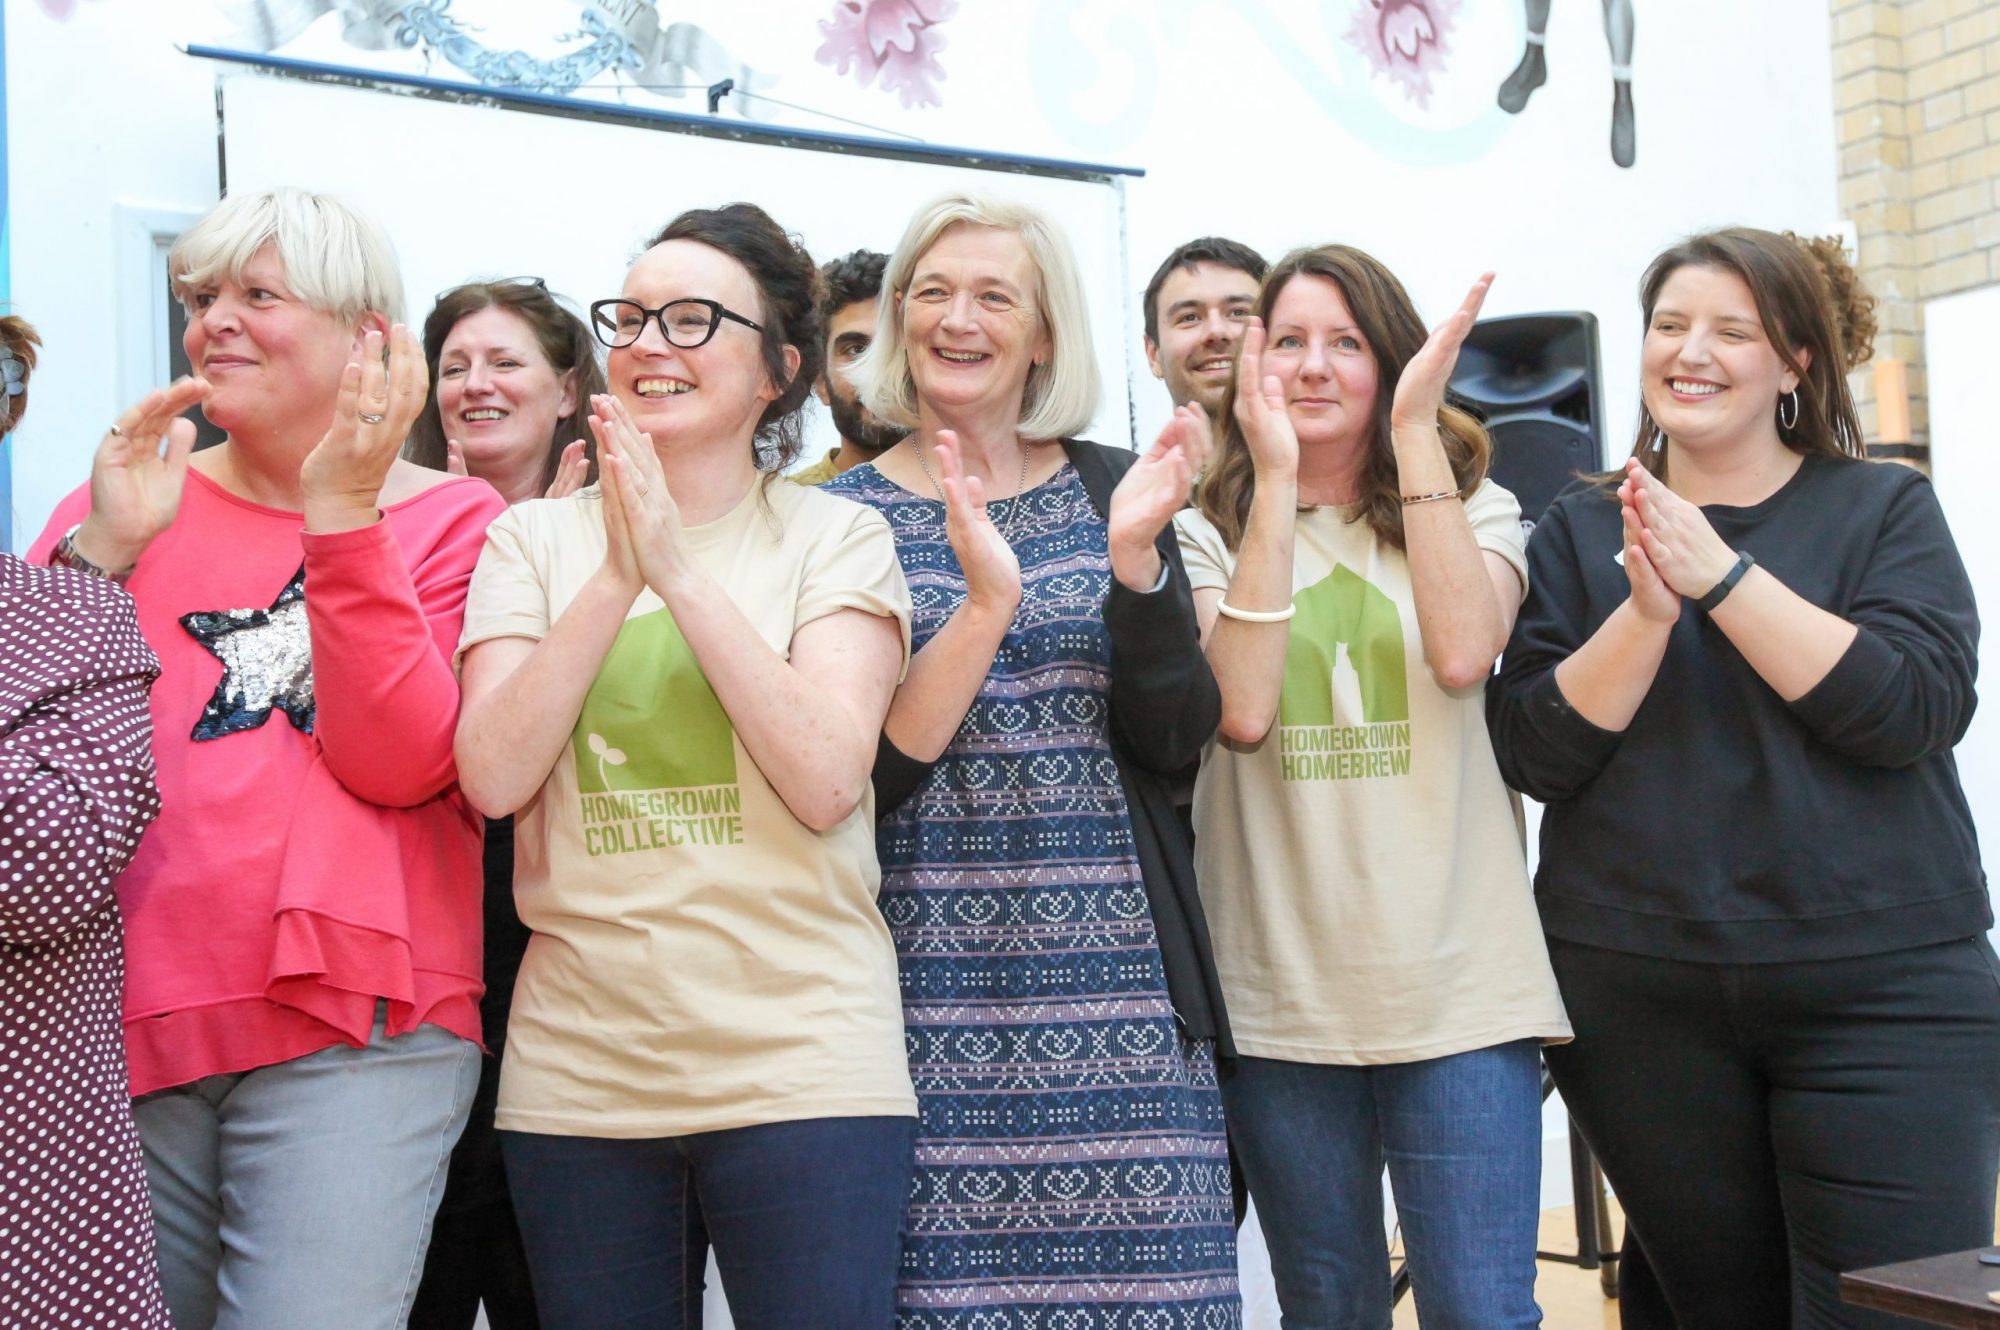 Bristol finalists of the M&S Community Business Challenge announced